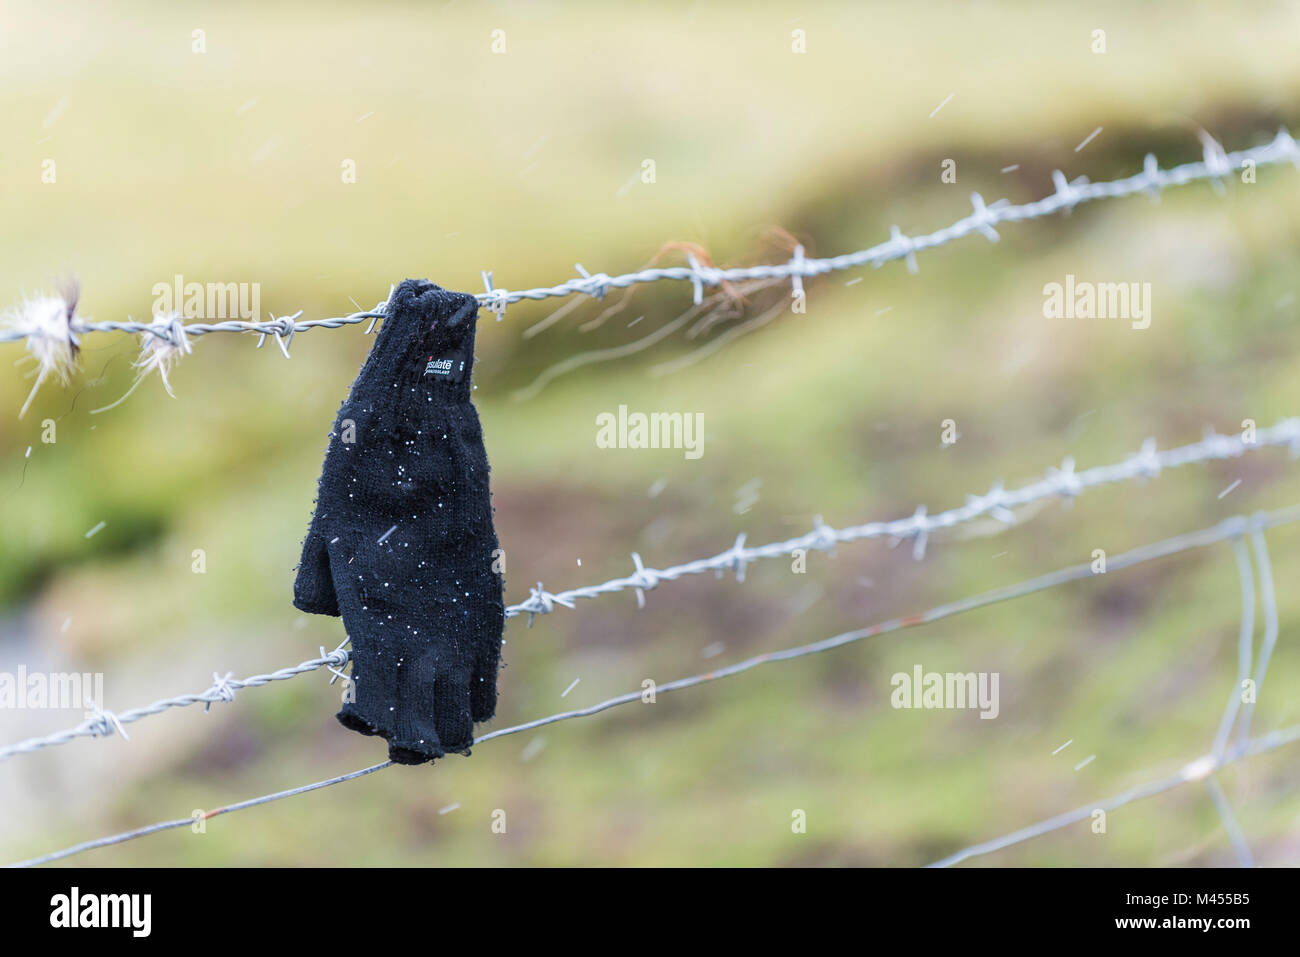 A fingerless mitten hanging off a barbed wire fence. Stock Photo